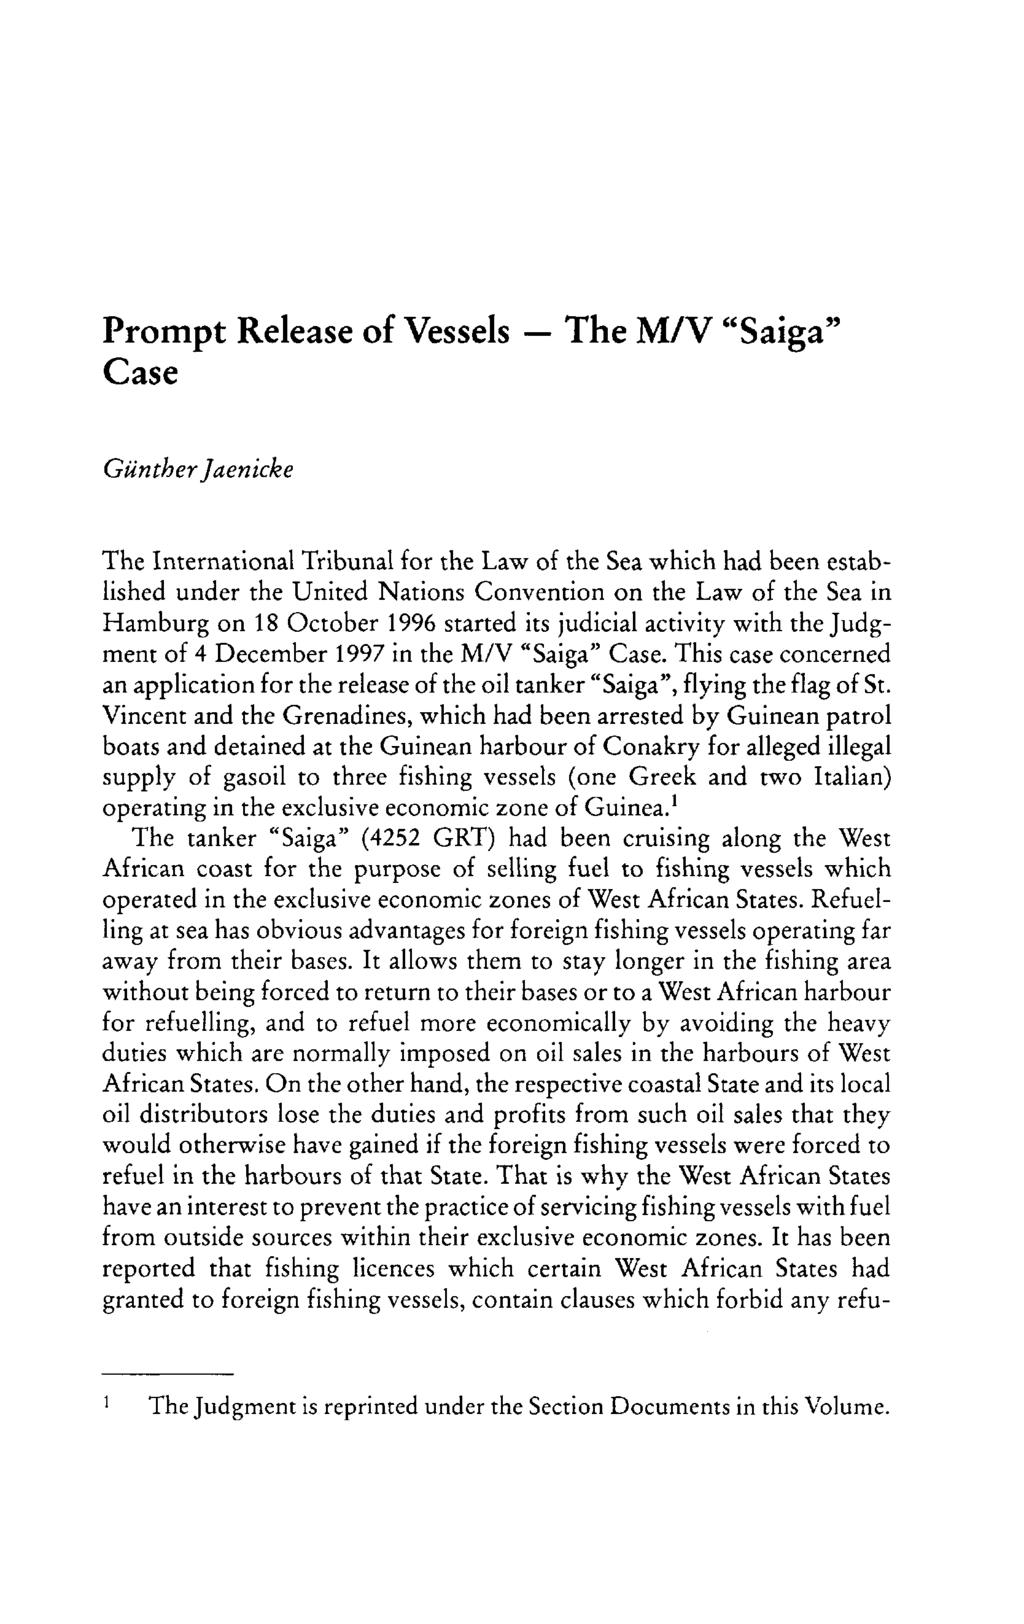 Prompt Release of Vessels The M/V "Saiga 3 Case Giintherjaenicke The International Tribunal for the Law of the Sea which had been established under the United Nations Convention on the Law of the Sea